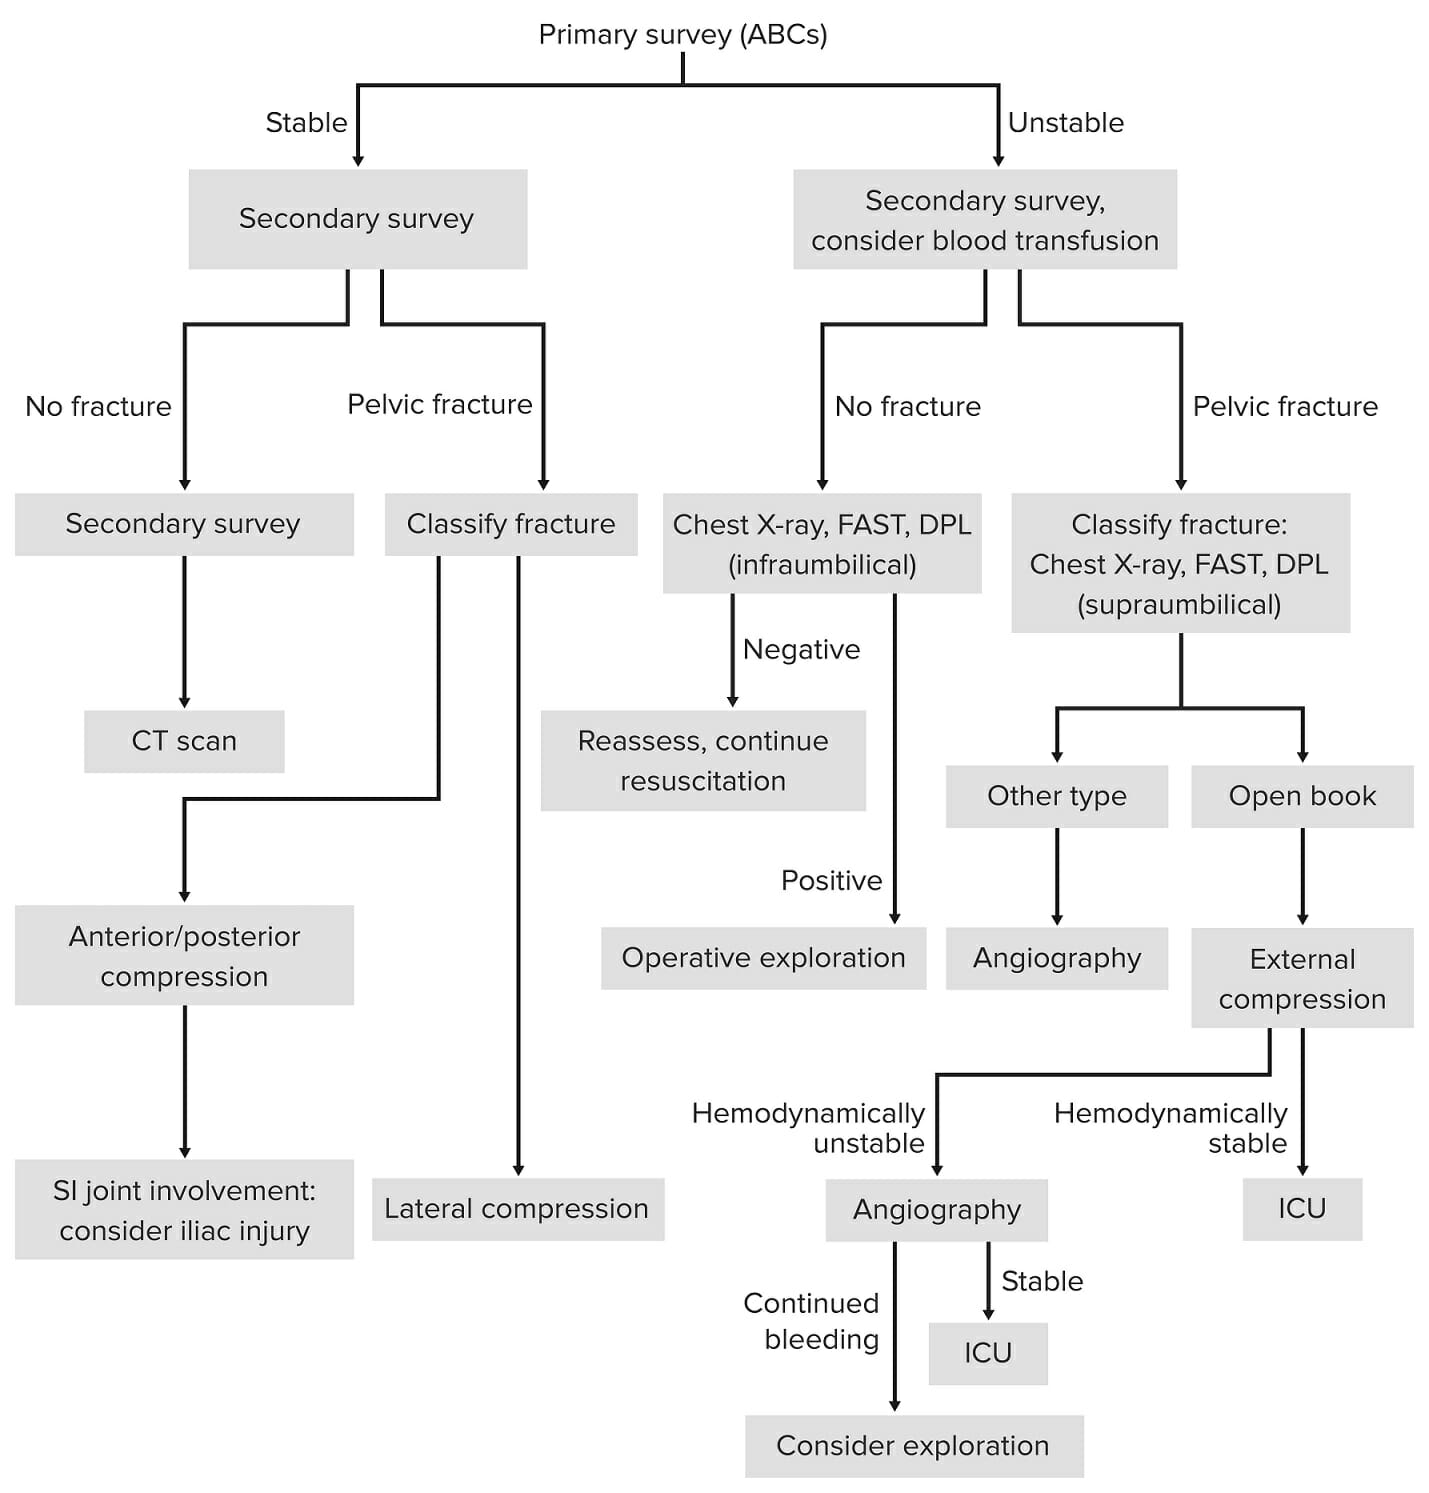 Nyu hospital for joint diseases algorithm for pelvic fractures